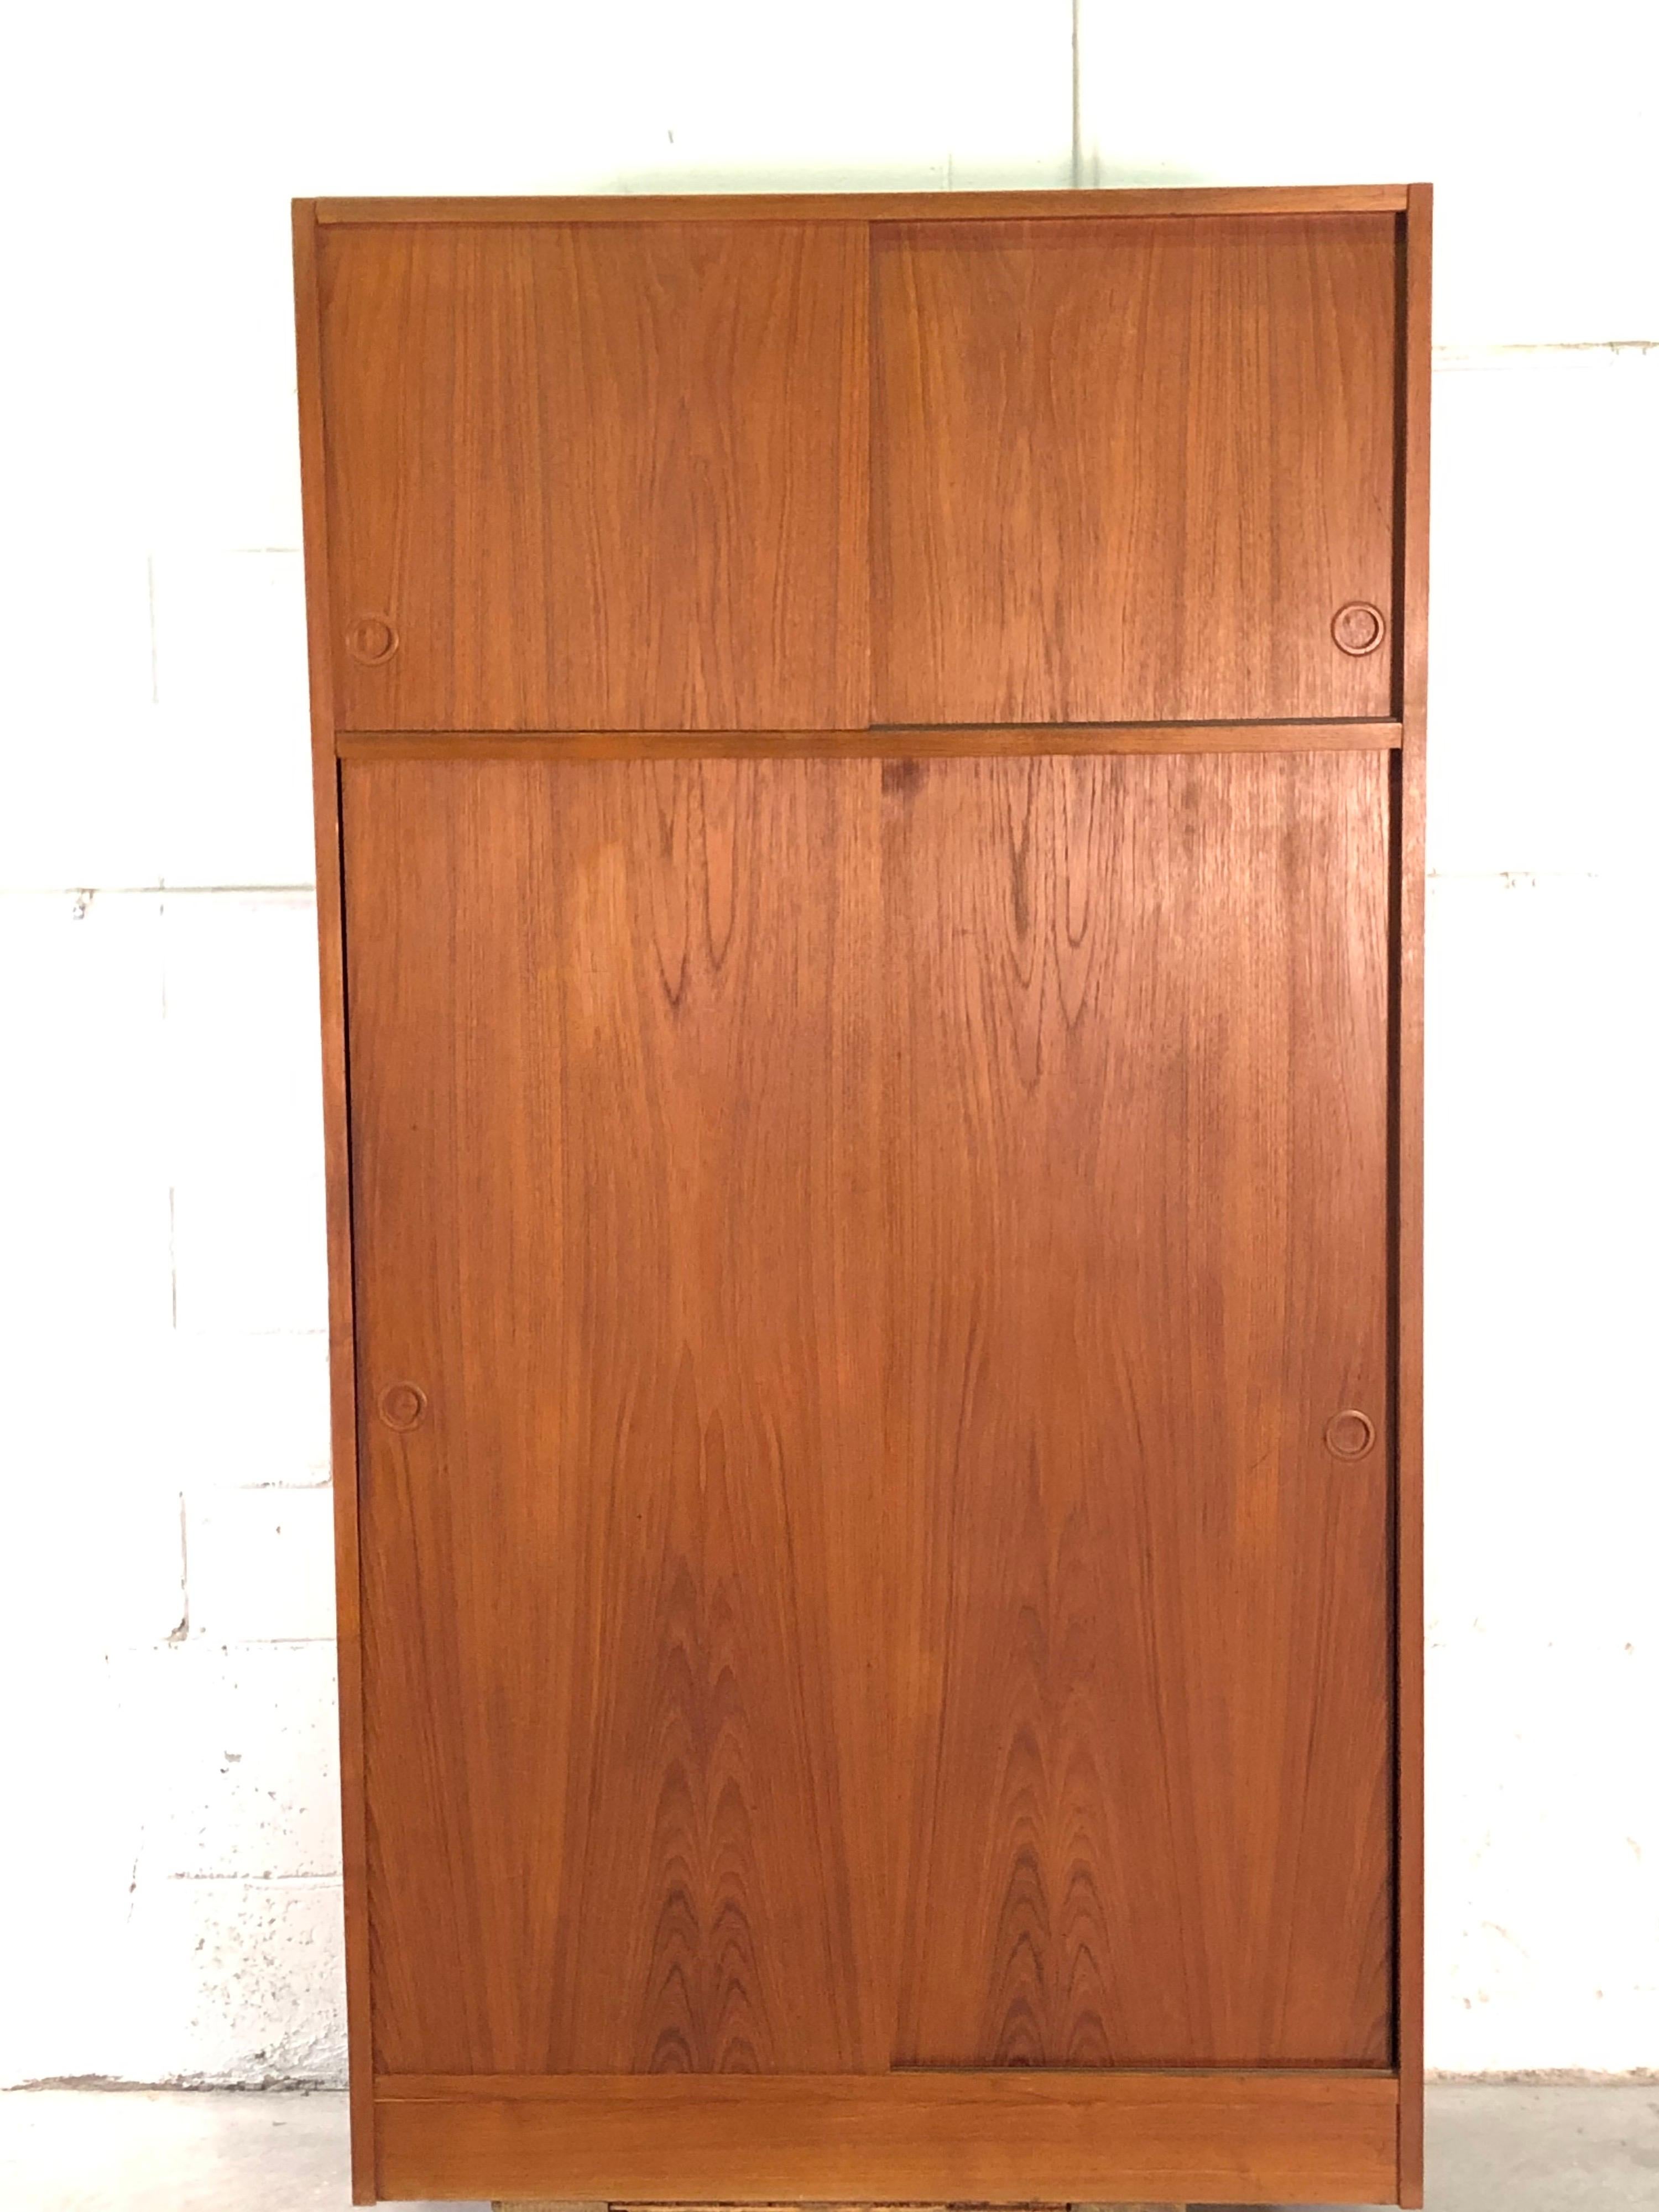 Vintage 1960s Danish teak wardrobe armoire designed by Tage Mogensen for the TM Line. The wardrobe offers a lot of storage with sliding doors and circular carved teak inset handles. Open storage on top, shelves that do not adjust on the left side